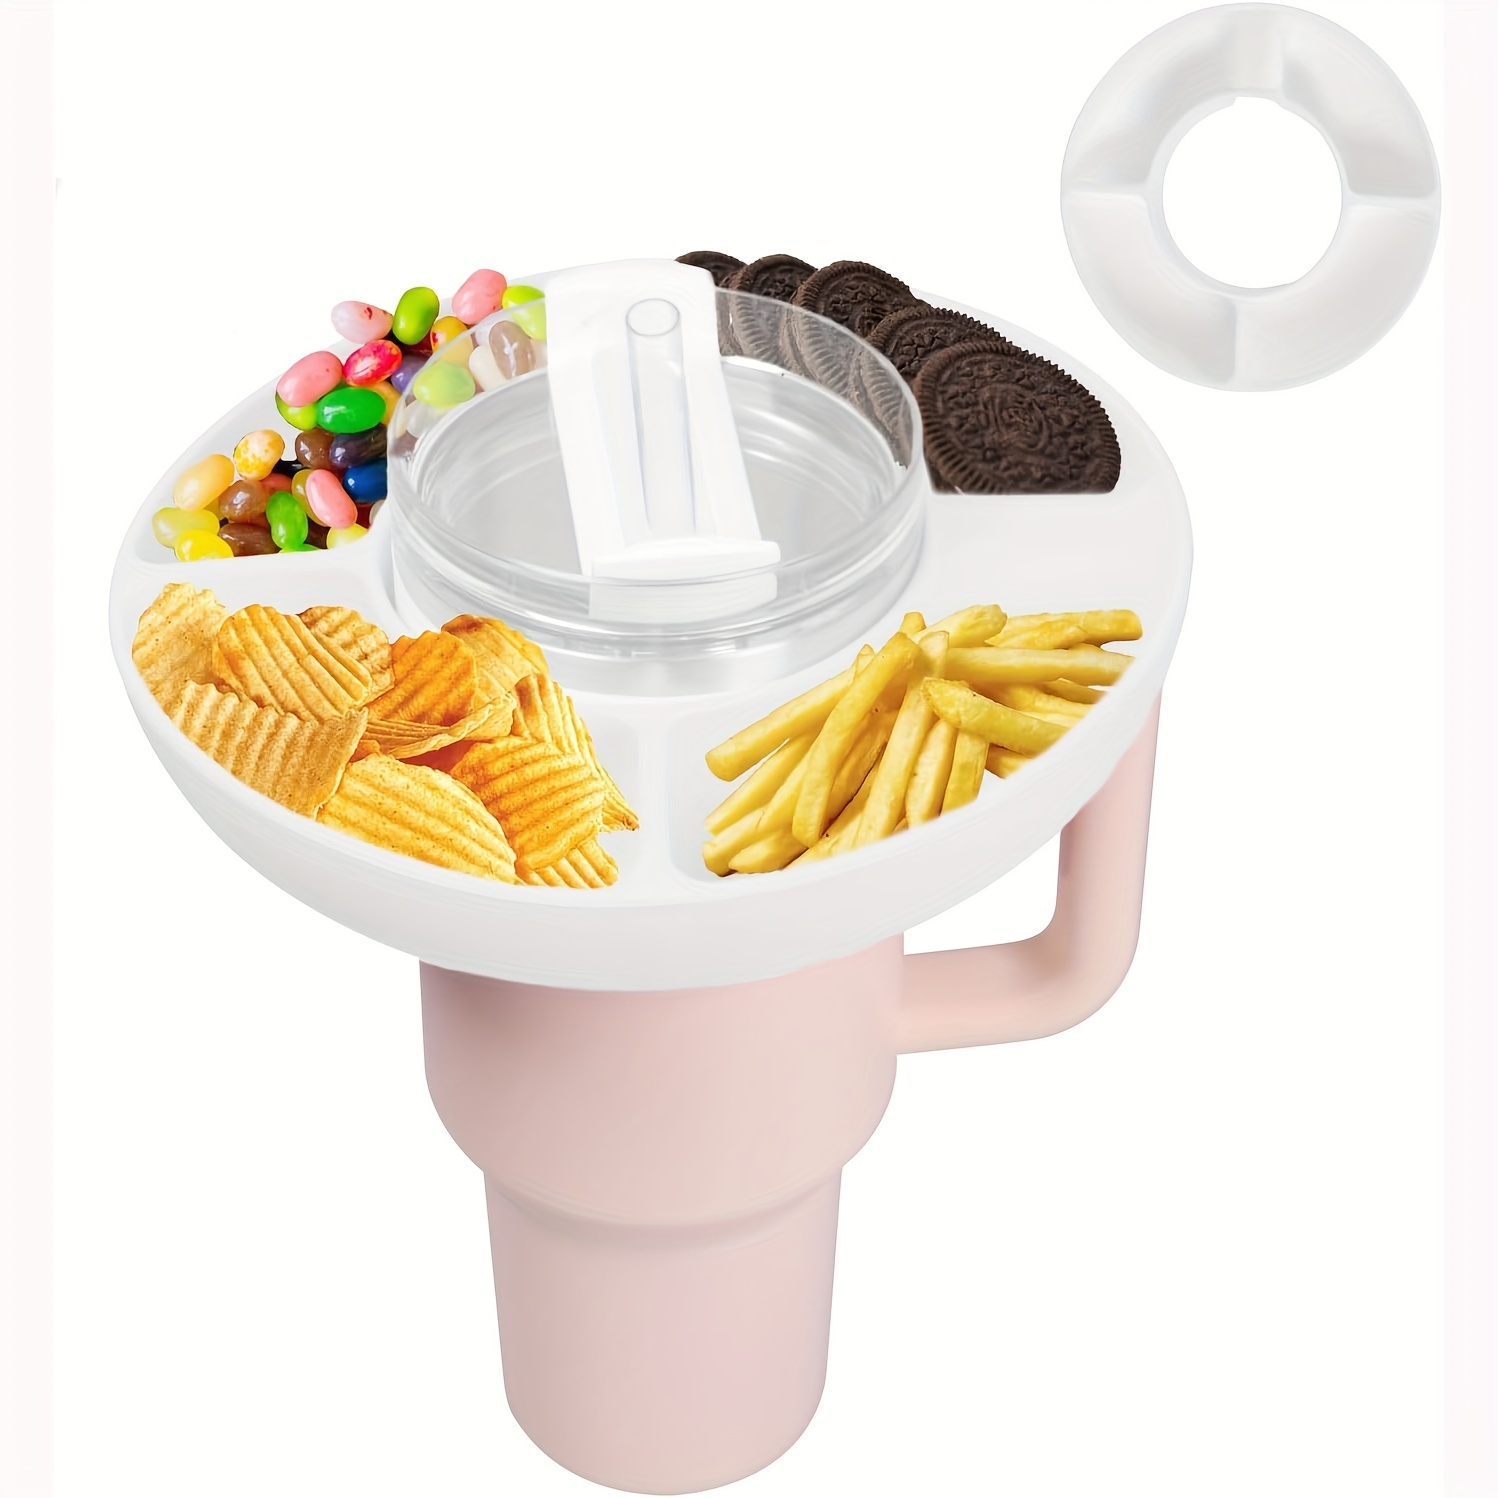 Reusable Silicone Snack Platter Suitable For Stanley Cup, Divided